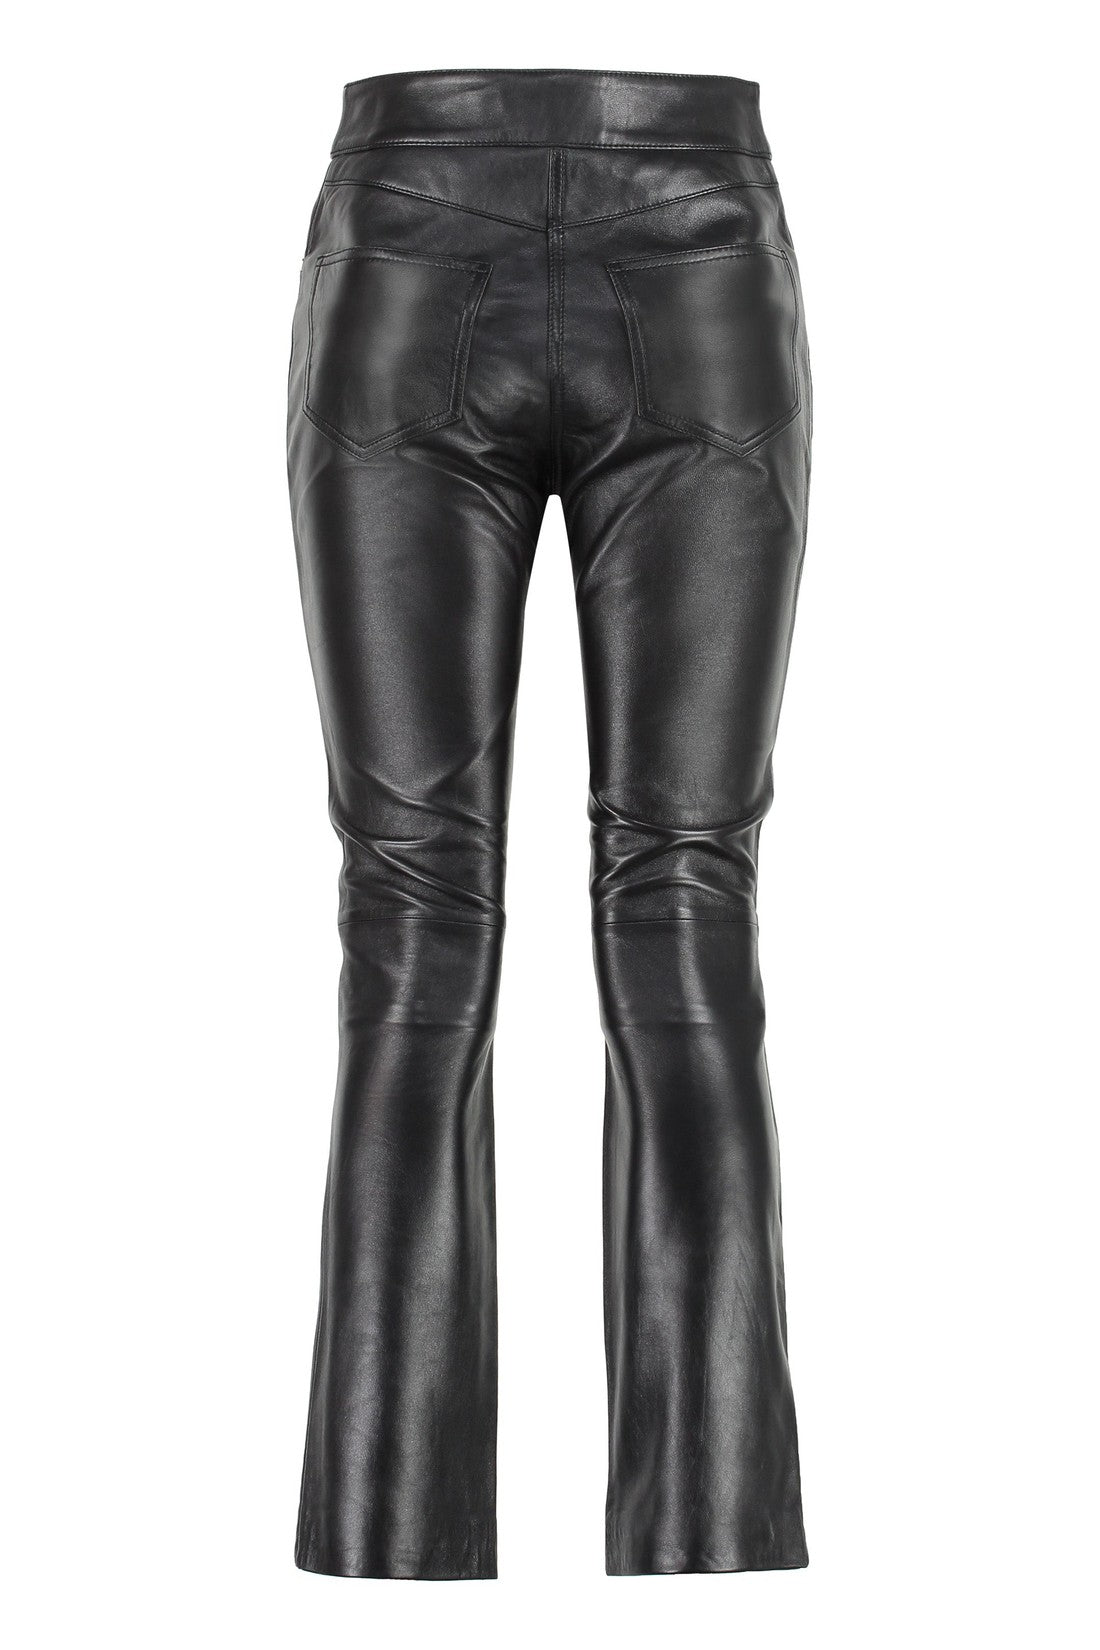 Stand Studio-OUTLET-SALE-Avery leather pants-ARCHIVIST